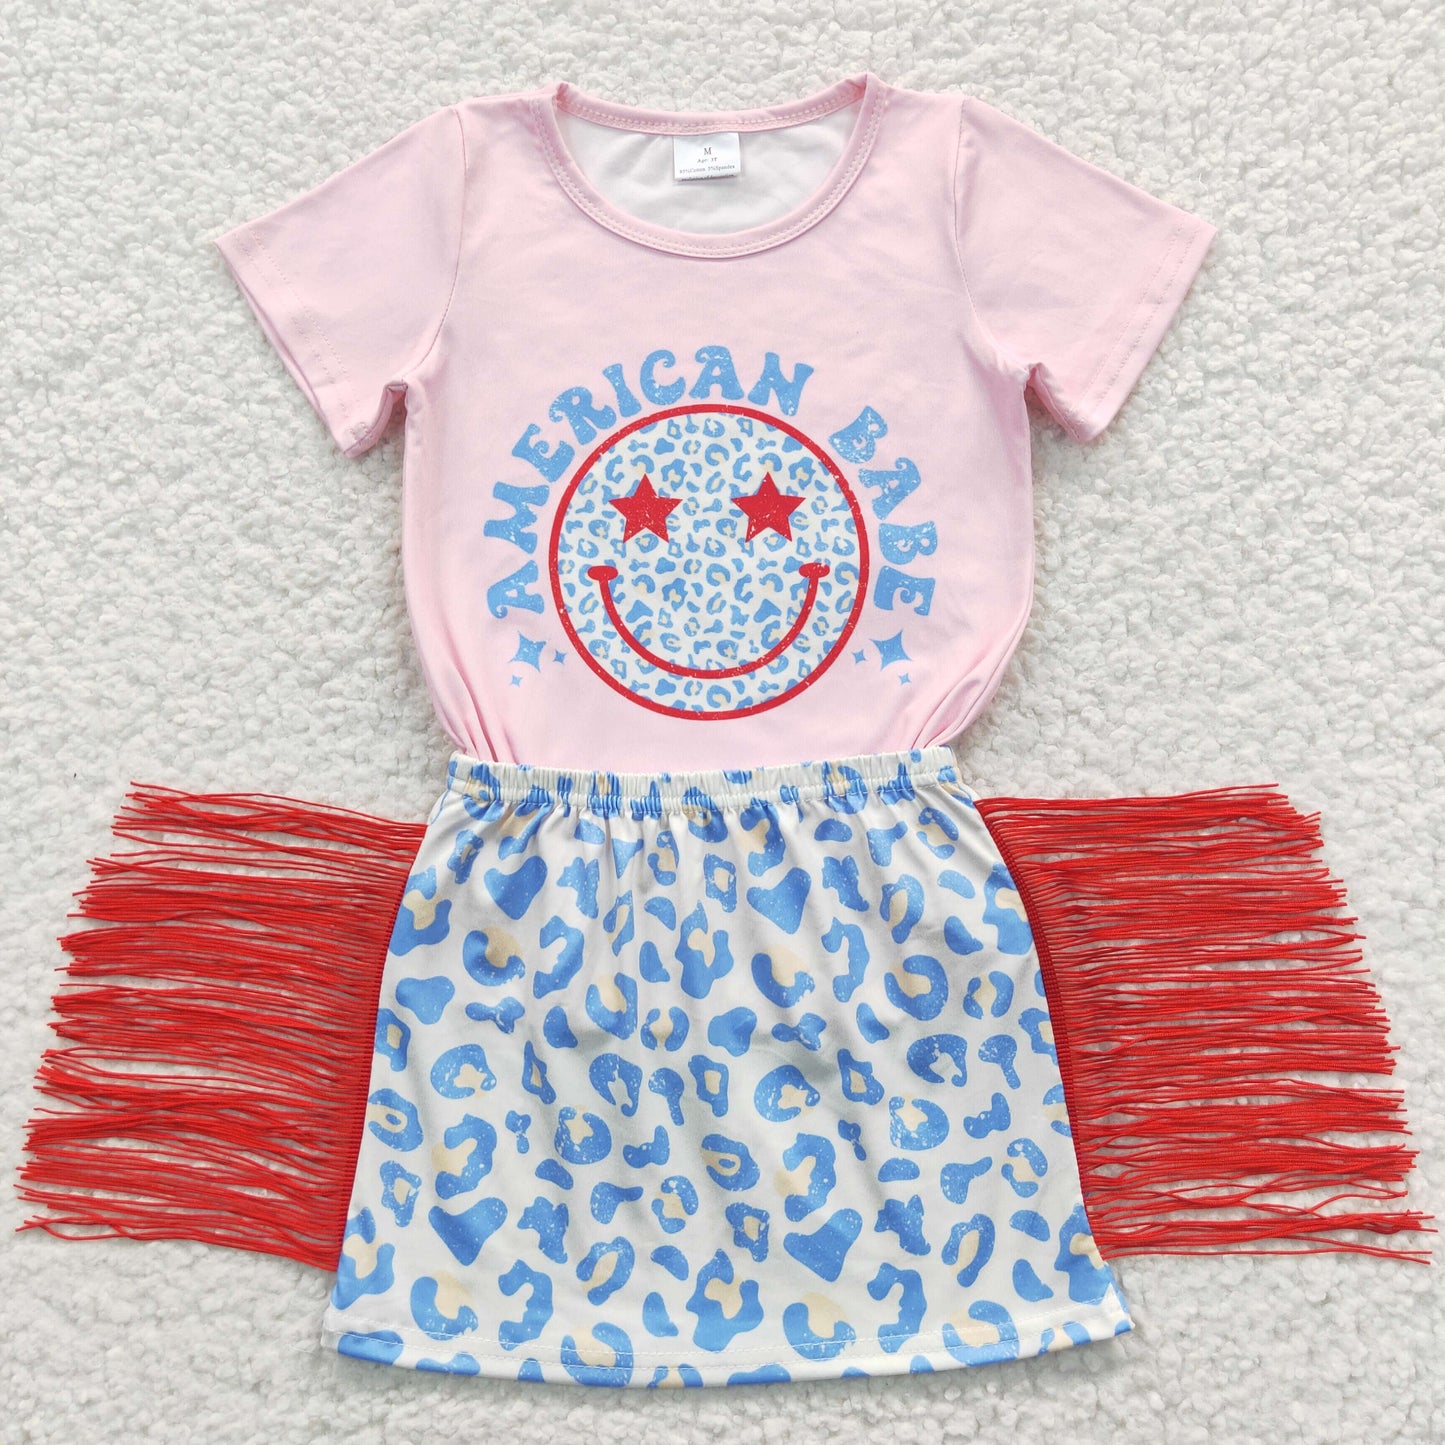 GSD0339 Girls American Babe leopard print tassels skirt 4th of July outfits